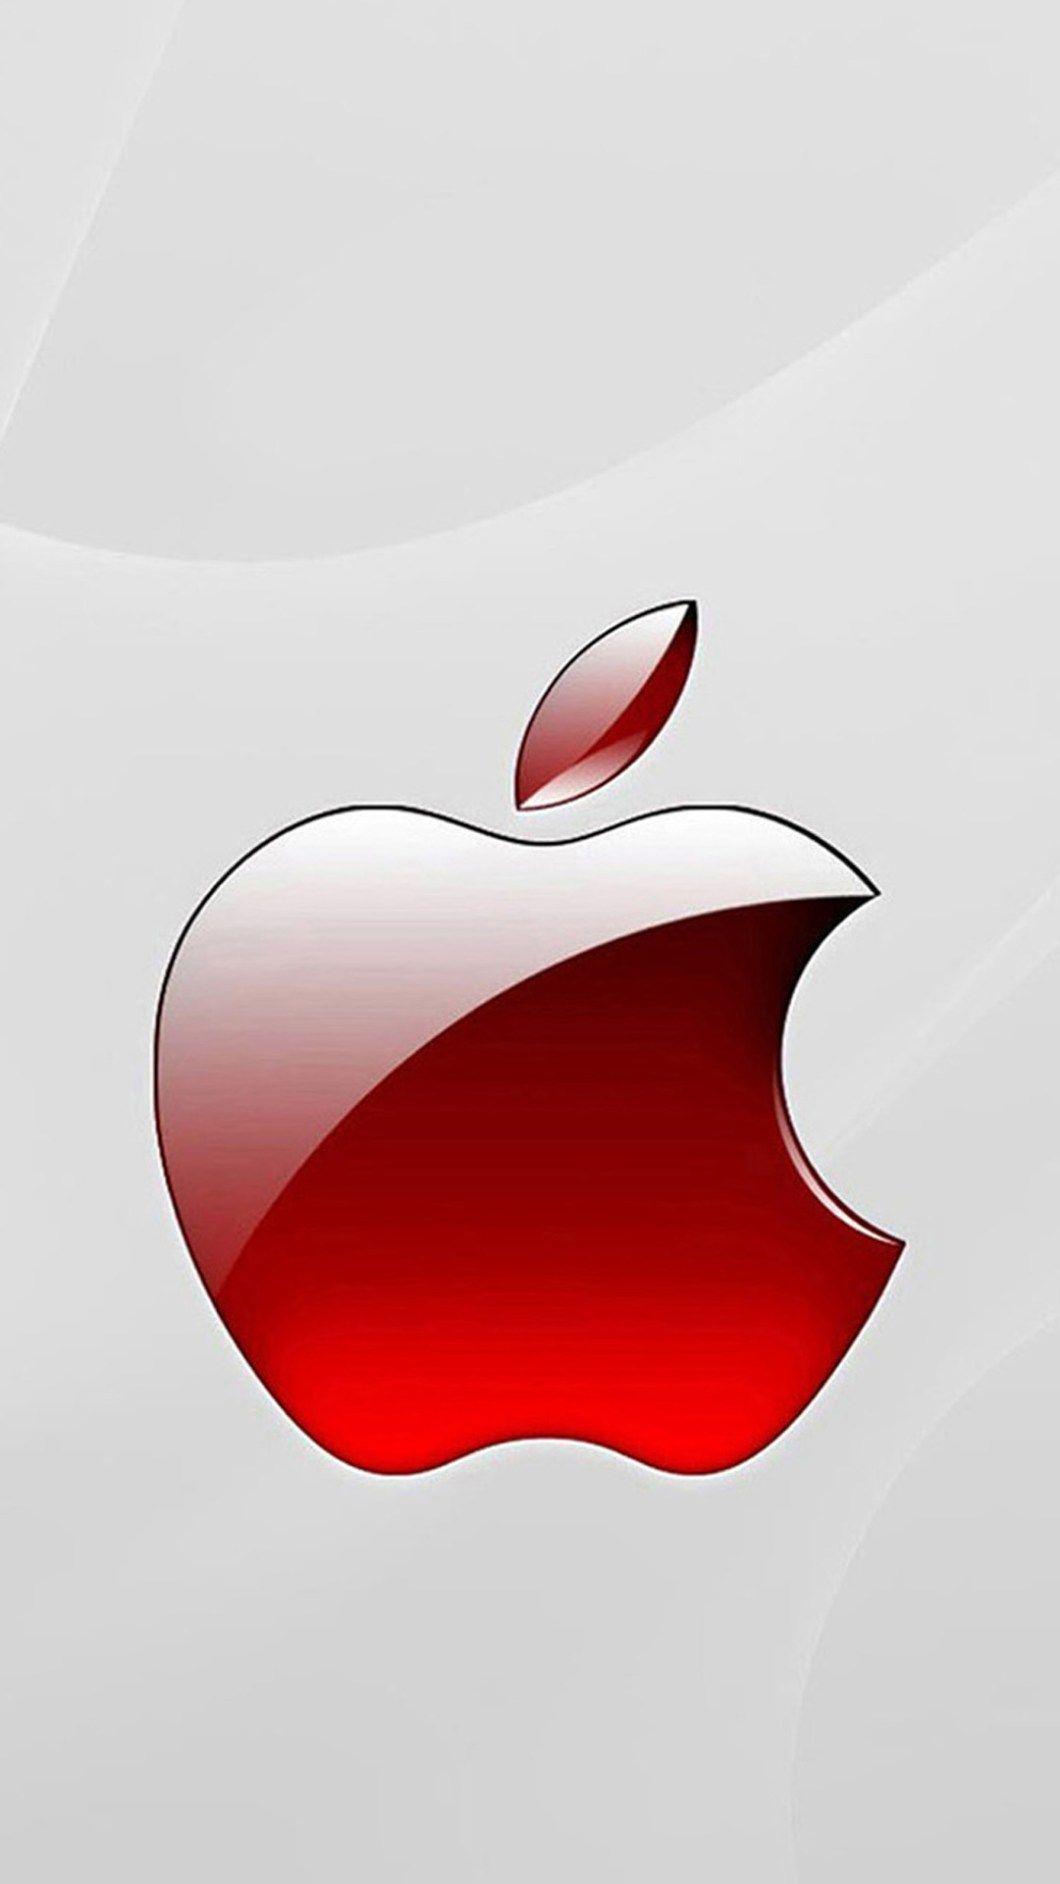 Wallpaper Red apple black background 1920x1200 HD Picture Image